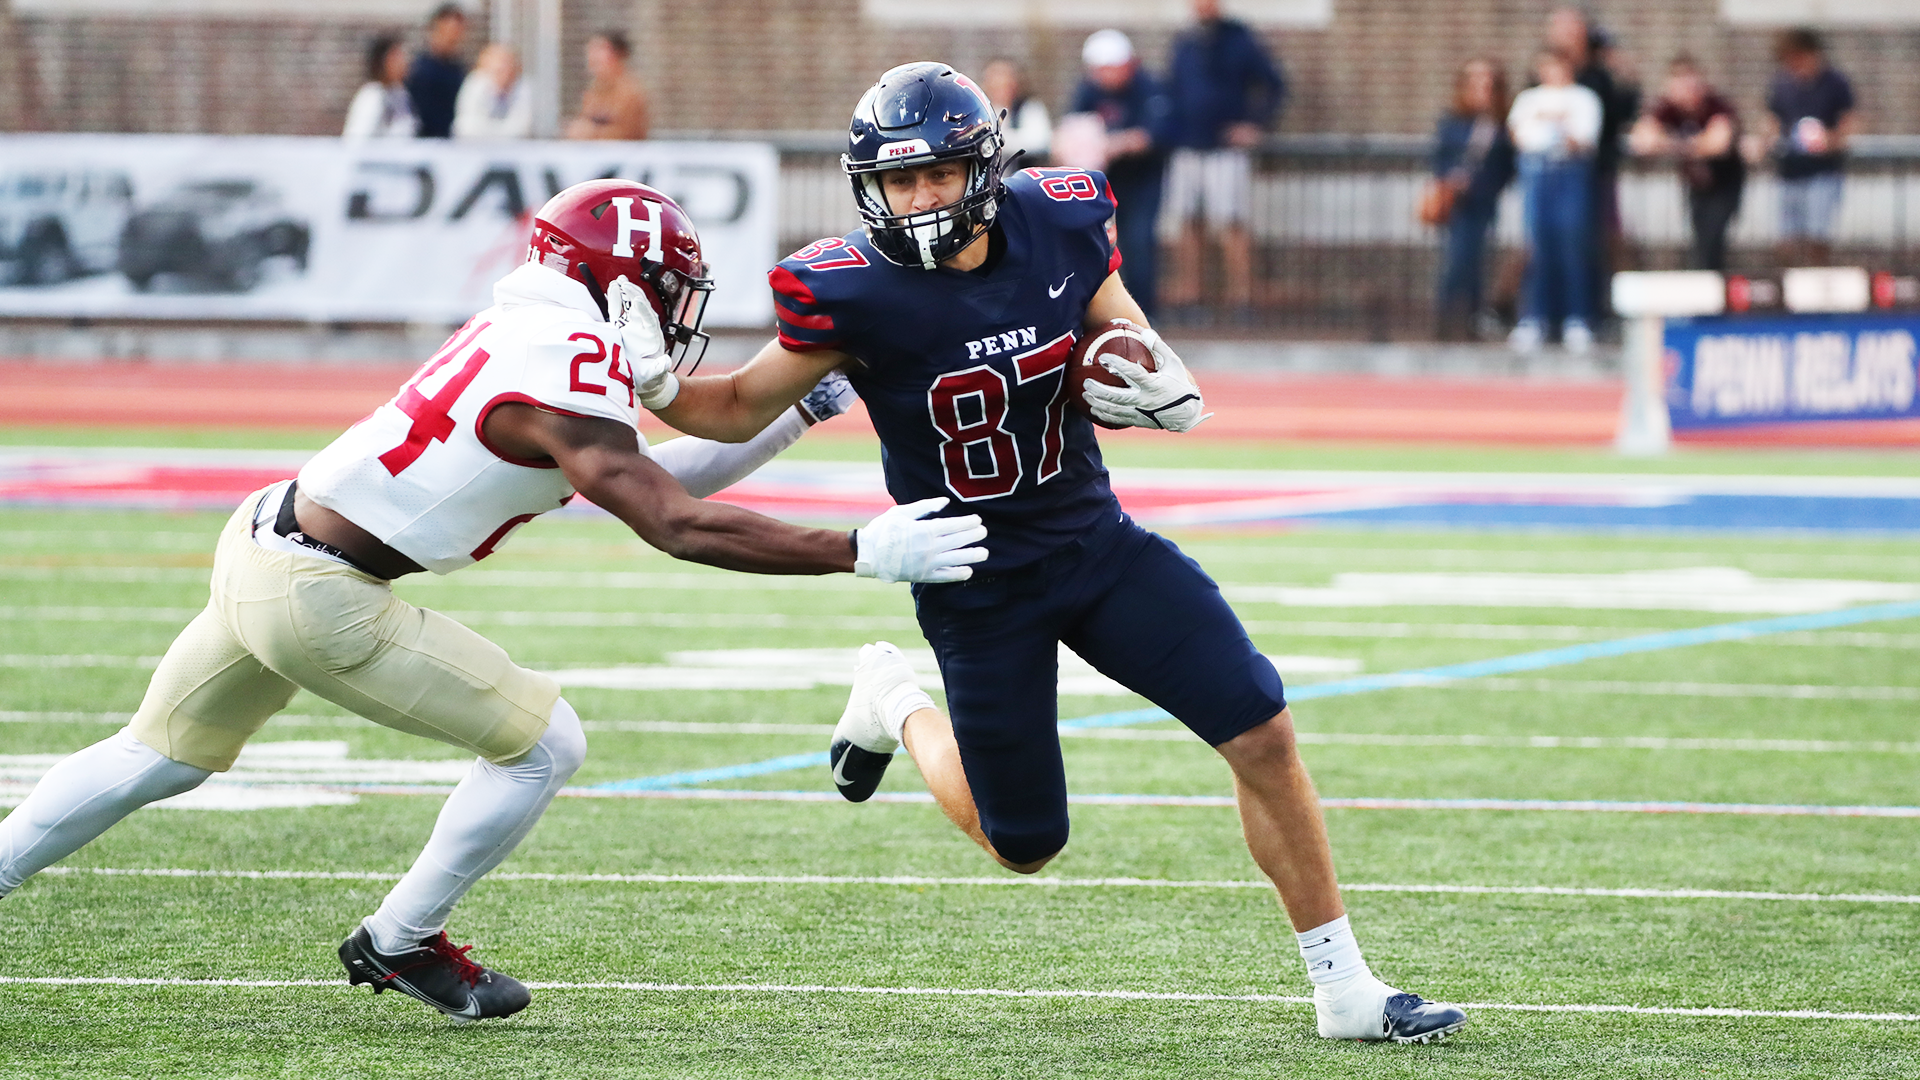 Joshua Casilli stiff arms a Harvard defender while running with the ball during a game at Franklin Field.